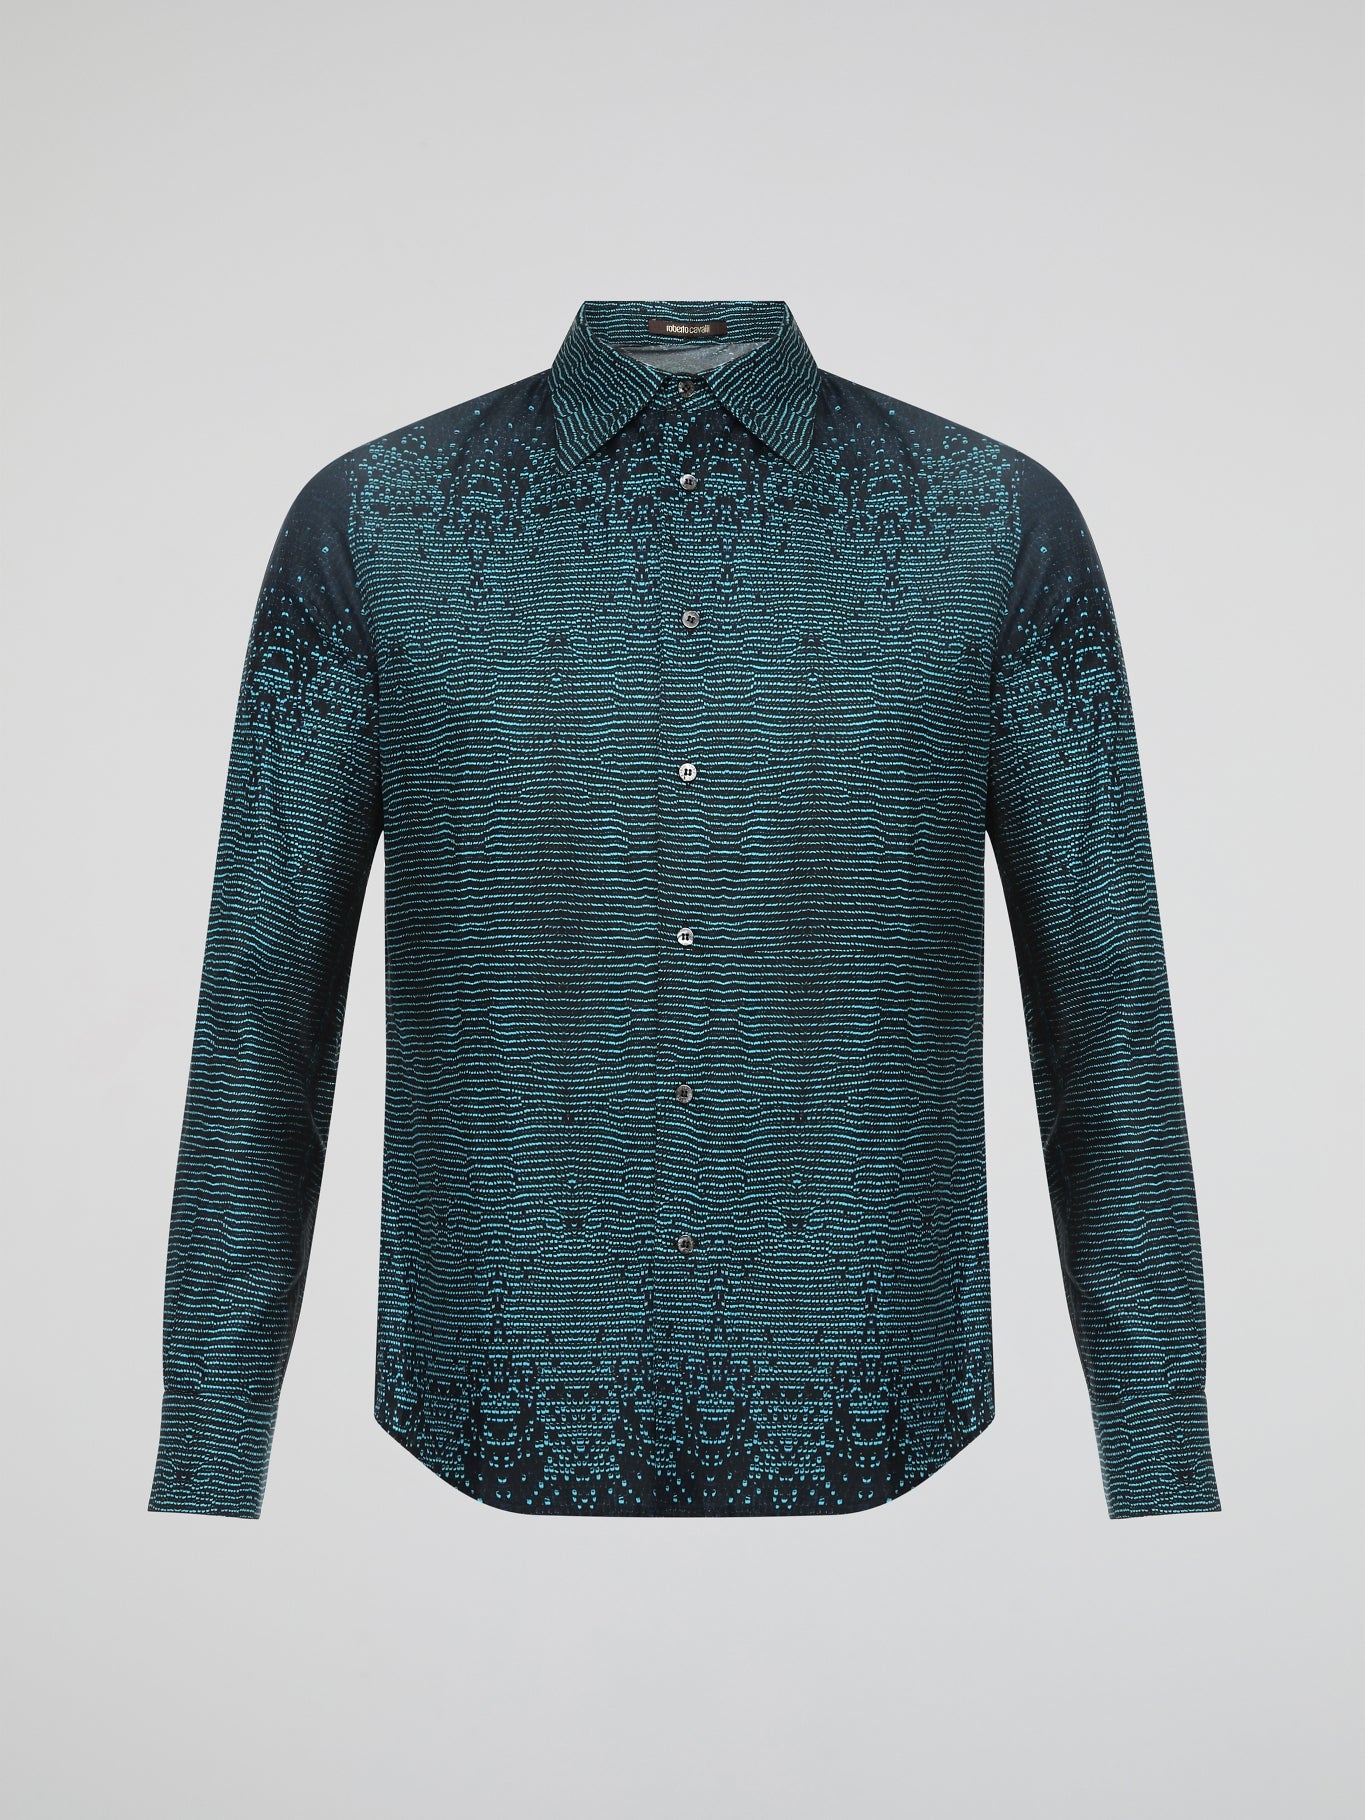 Introducing the epitome of effortless sophistication - our Green Button Up Shirt by Roberto Cavalli. Crafted with meticulous attention to detail, this shirt exudes a sleek yet playful vibe, perfect for the modern trendsetter. Its vibrant green hue, paired with a flawless slim-fit design, ensures that all eyes will be on you wherever you go, making it a wardrobe essential for the fashion-forward individual.